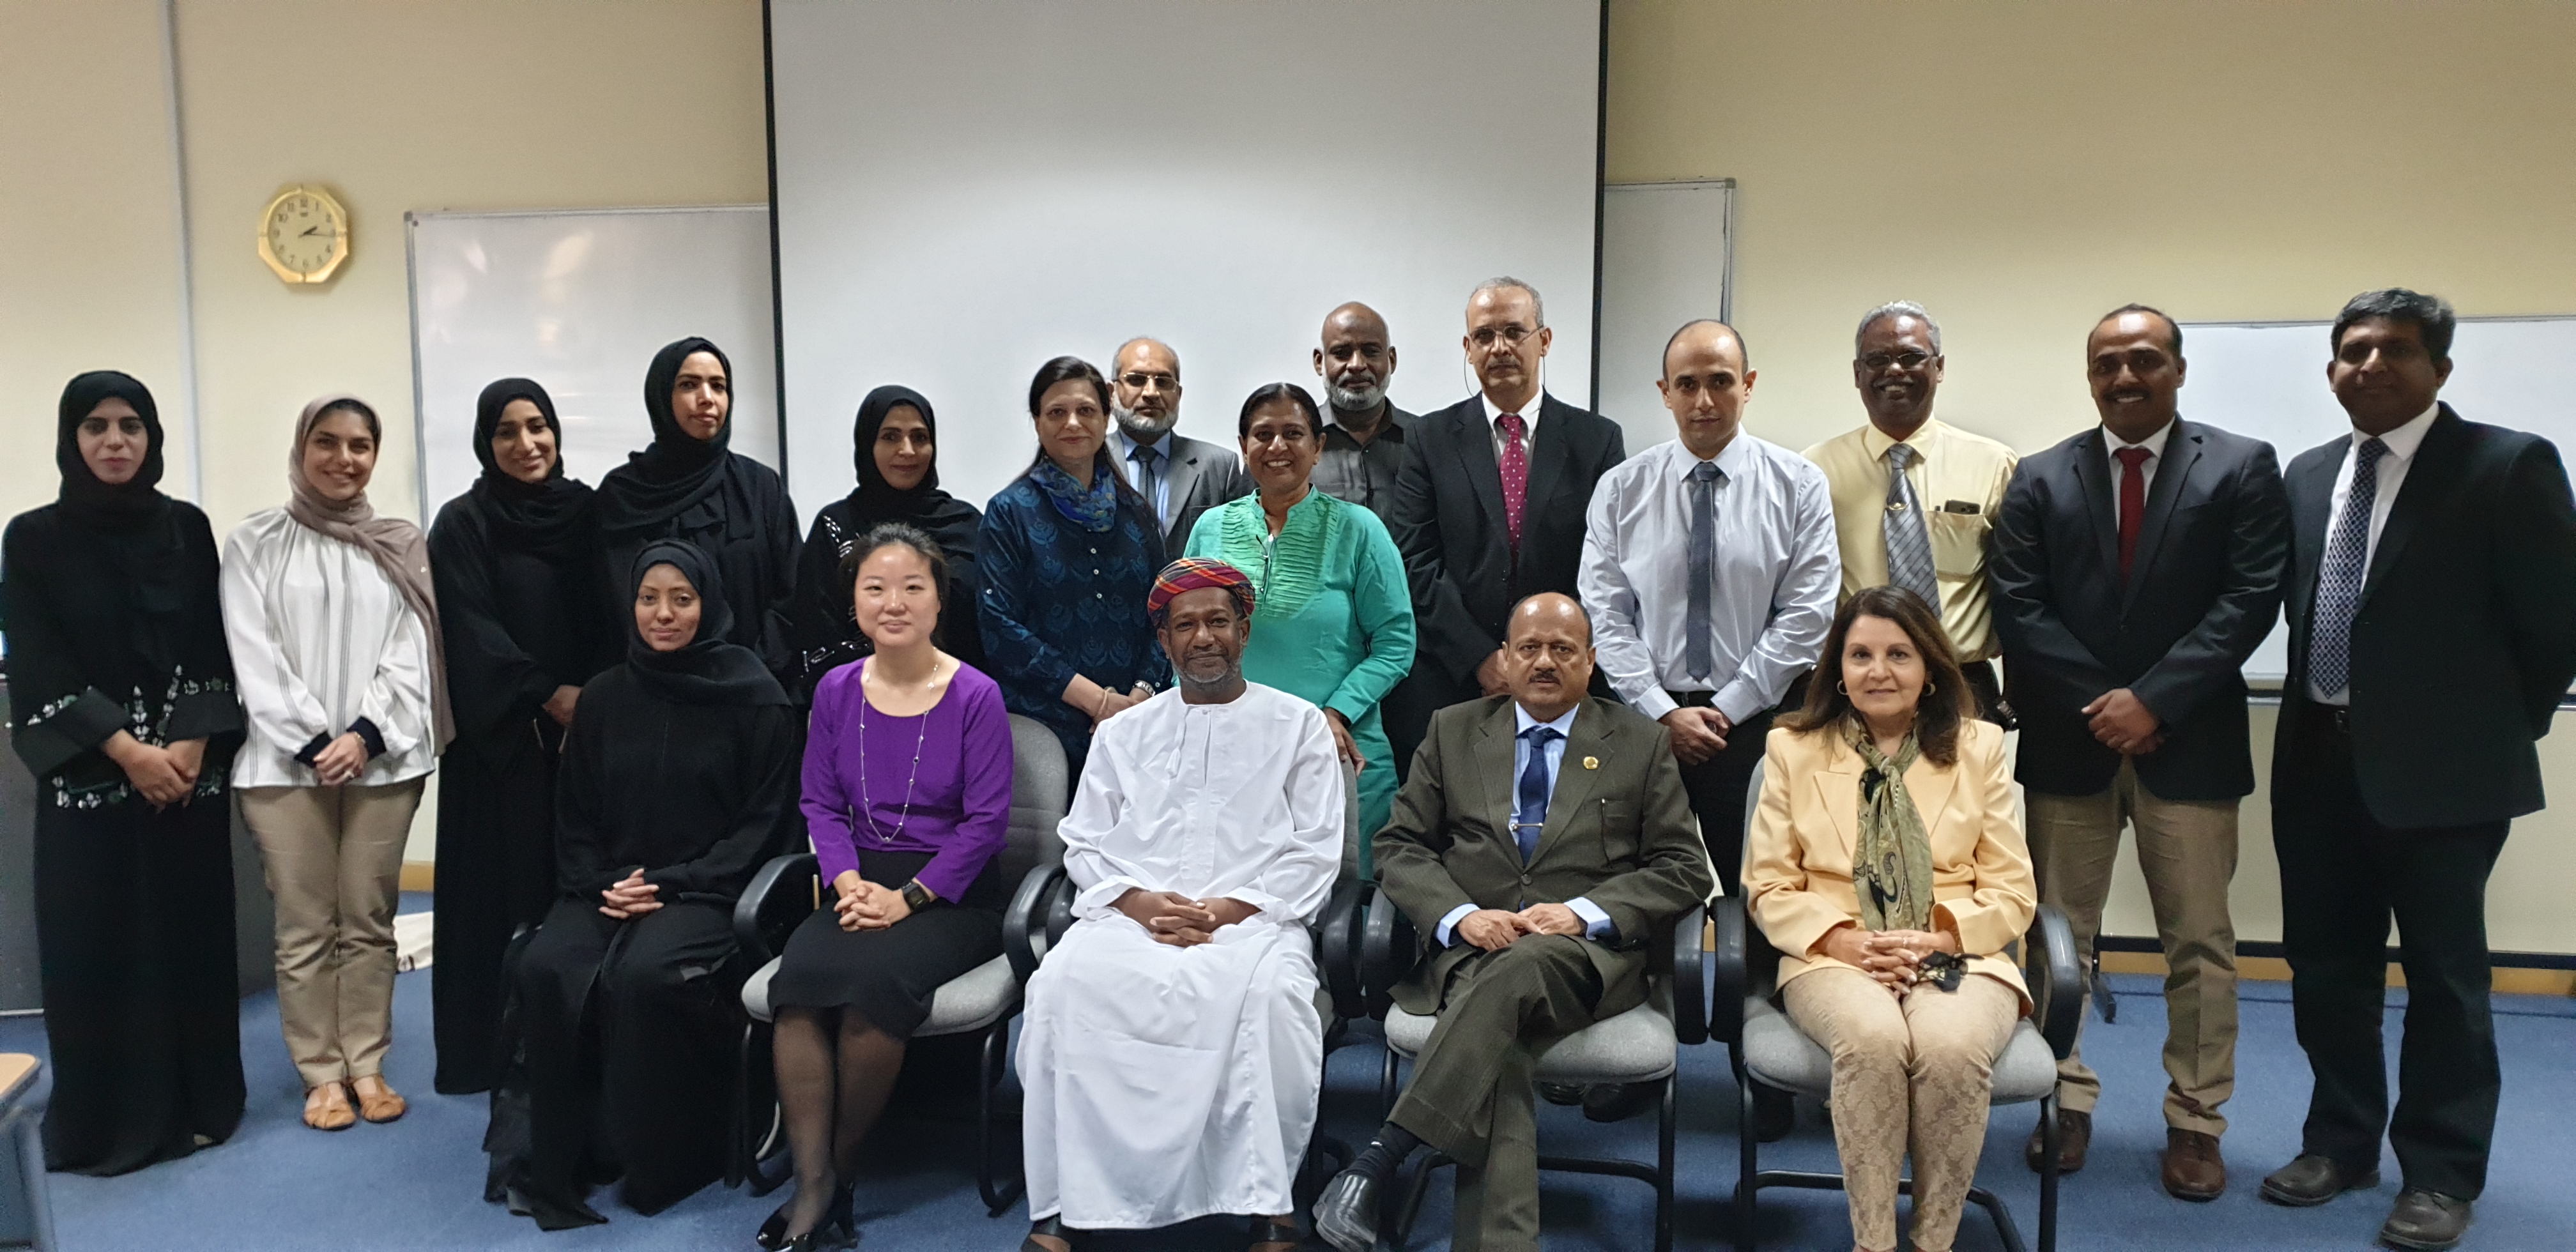 The WHO country office in Oman facilitated a visit by Lareb’s Dr. Linda Härmark, front row, second from left. Photo: Ministry of Health, Oman